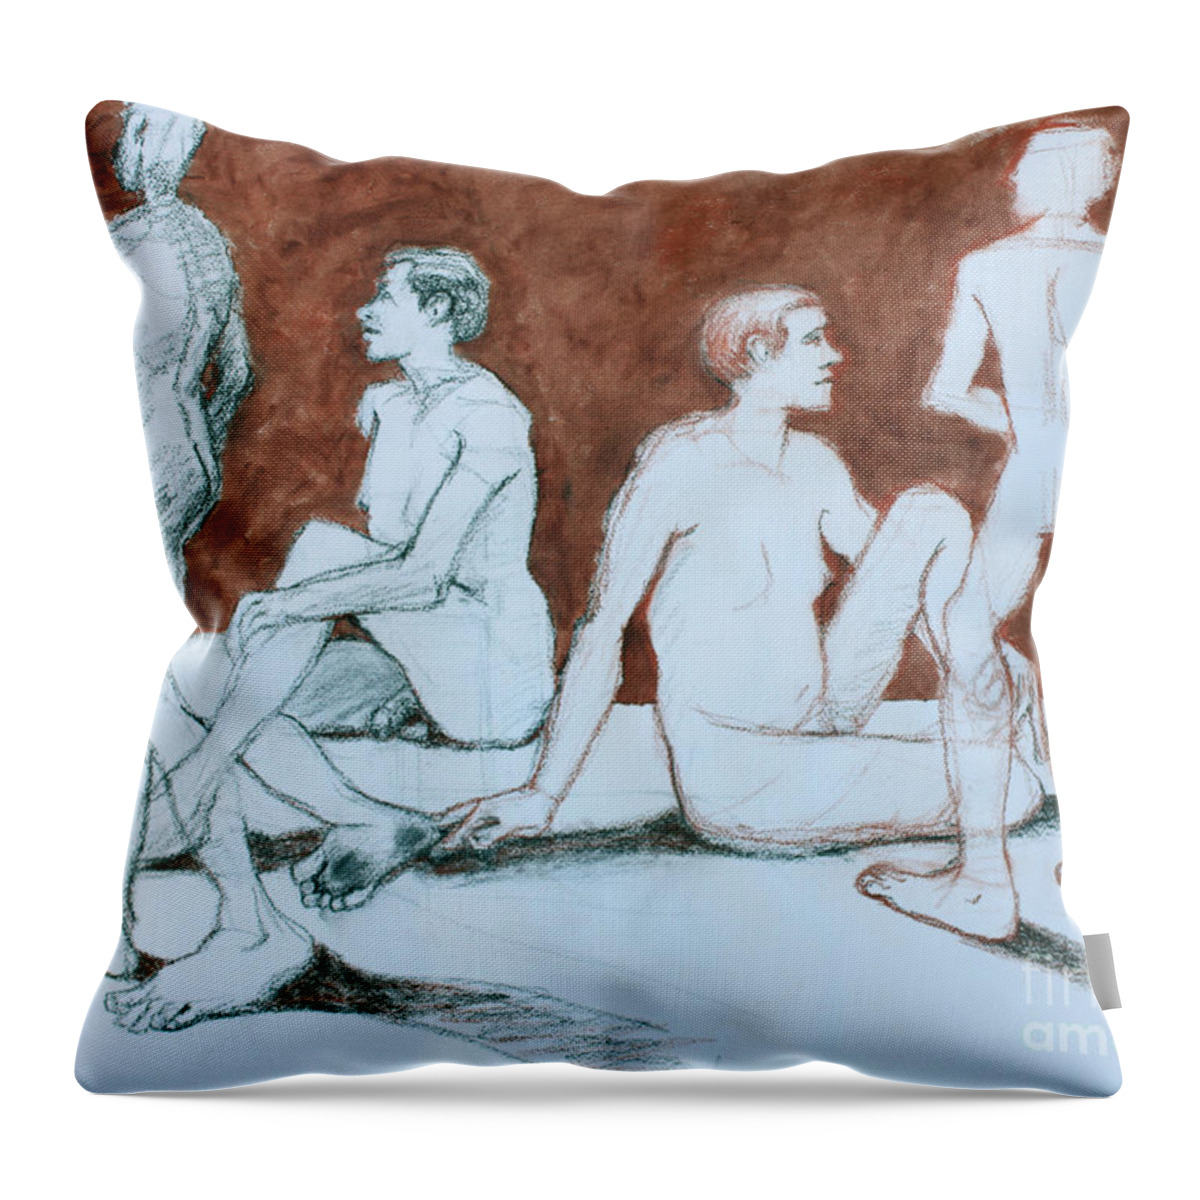 Charcoal Drawing Throw Pillow featuring the mixed media Bigfoot by PJ Kirk